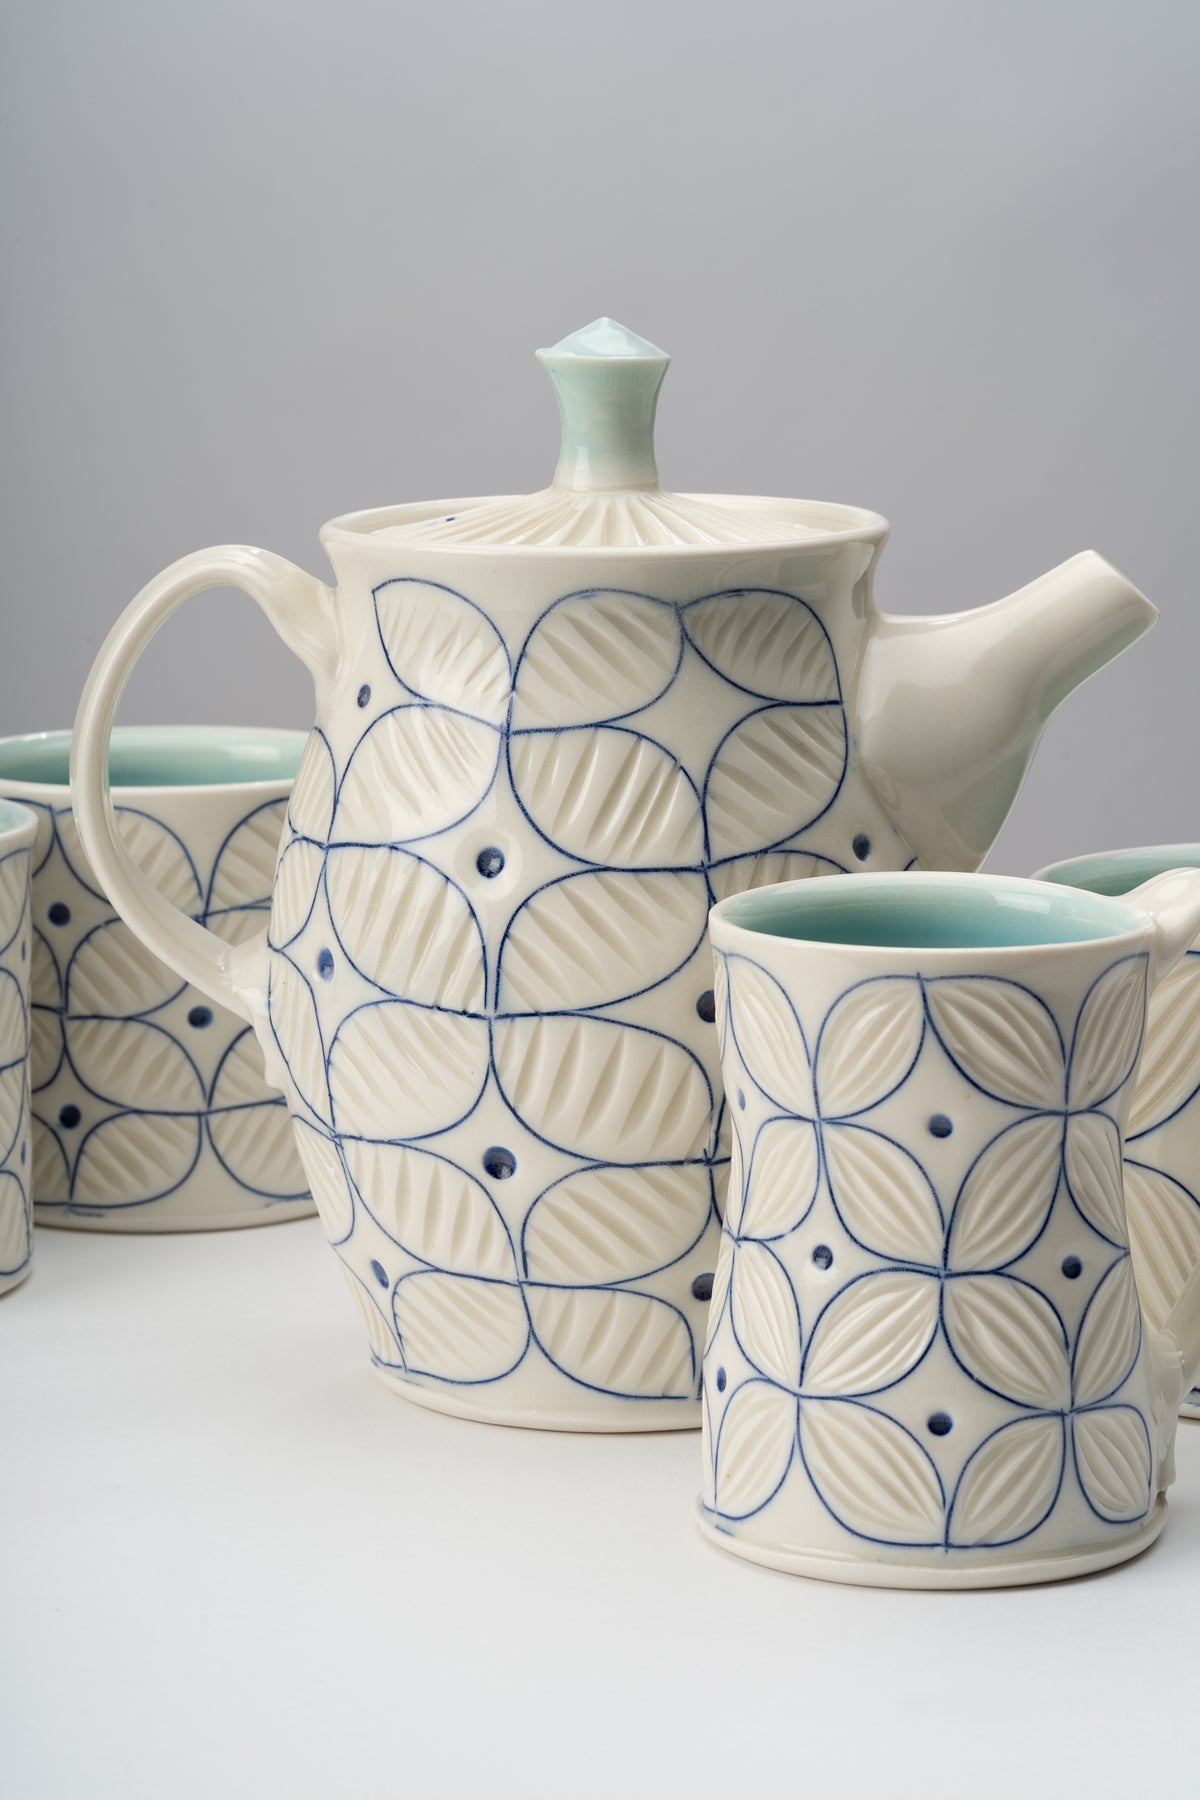 White and blue handmade porcelain cups and a teapot by ceramic artist Julie Wiggins sit on a white table against a grey background. Image by Loam